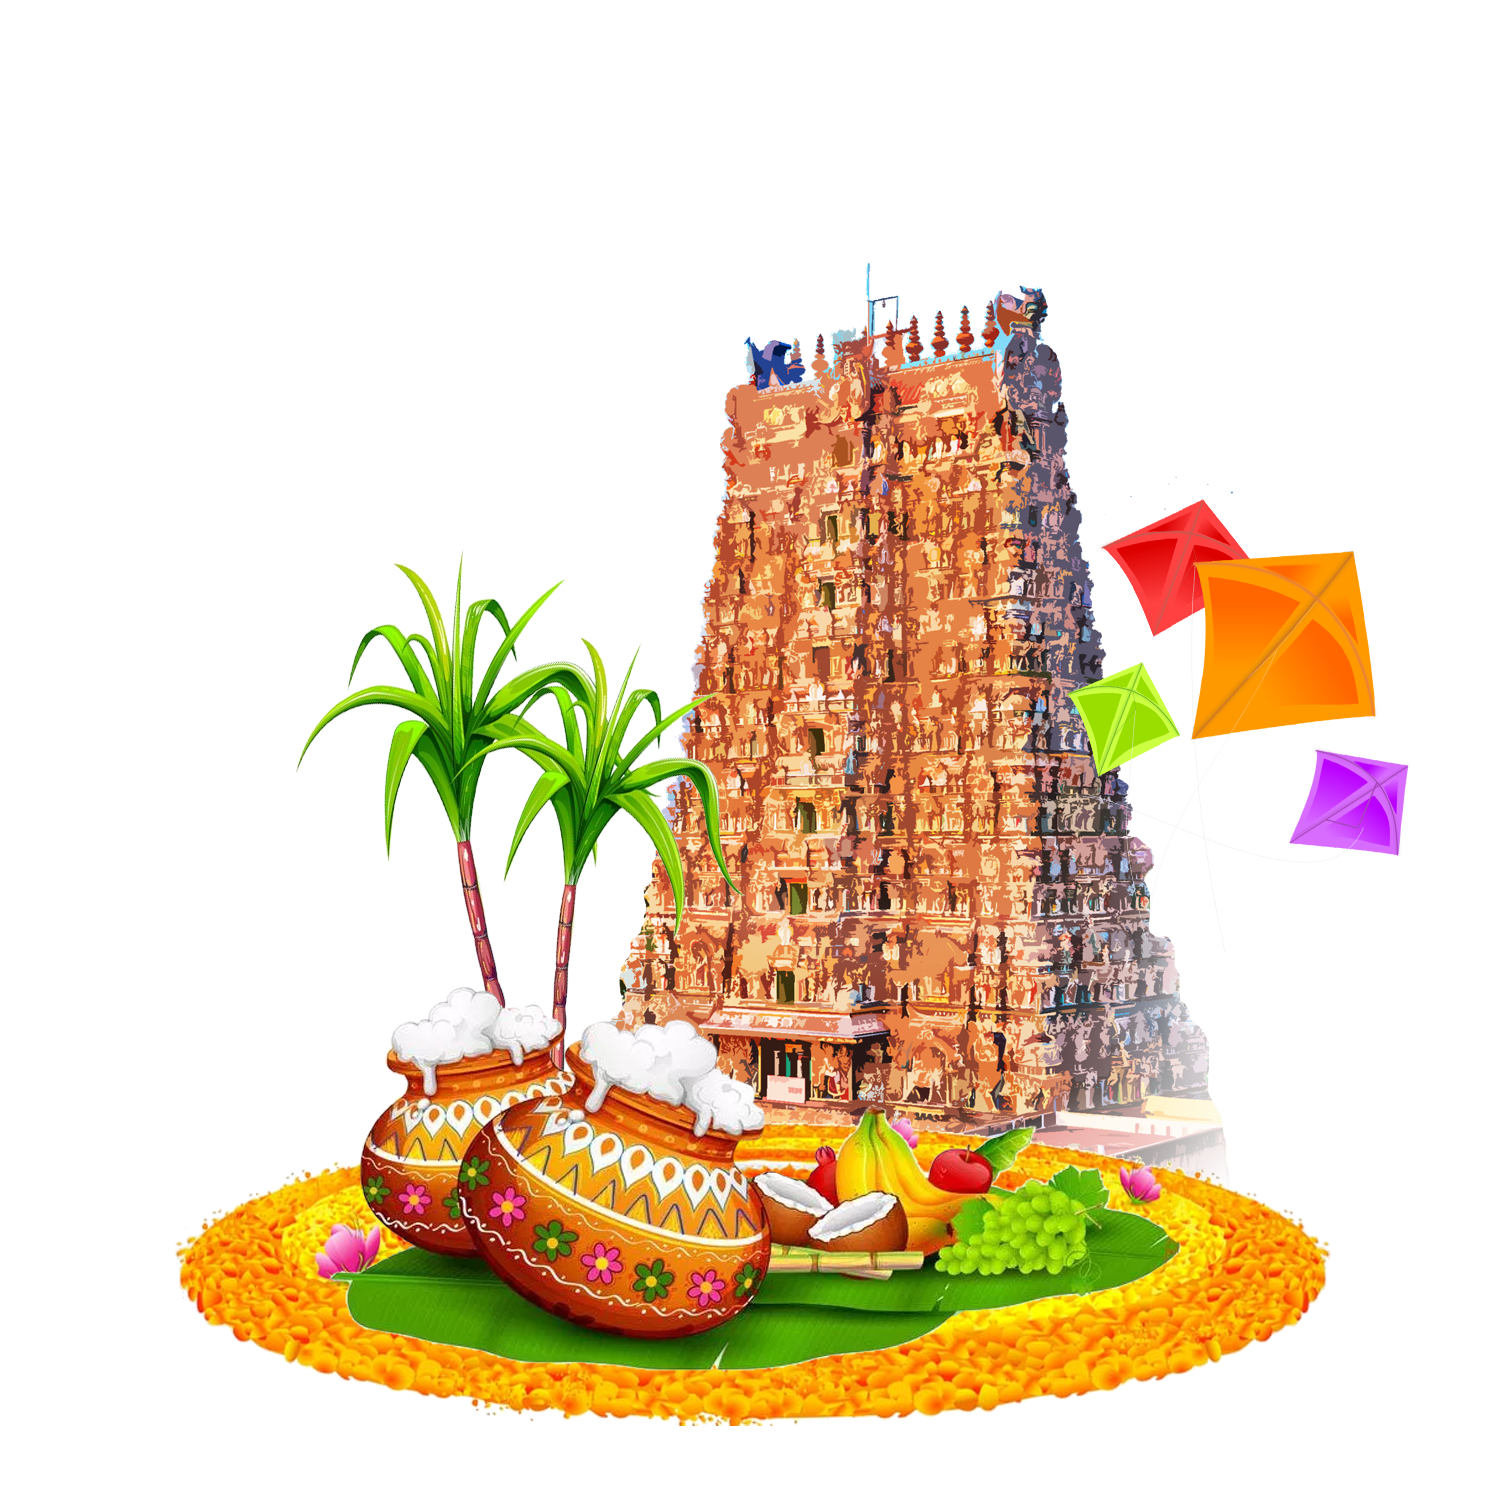 Pongal Graphic Pongal Vector Pongal Greetings, Pongal Greetings In Tamil, Pongal Wishes In English, Pongal Image PNG Transparent Clipart Image and PSD File for. Pongal image, Happy pongal, Happy pongal wishes